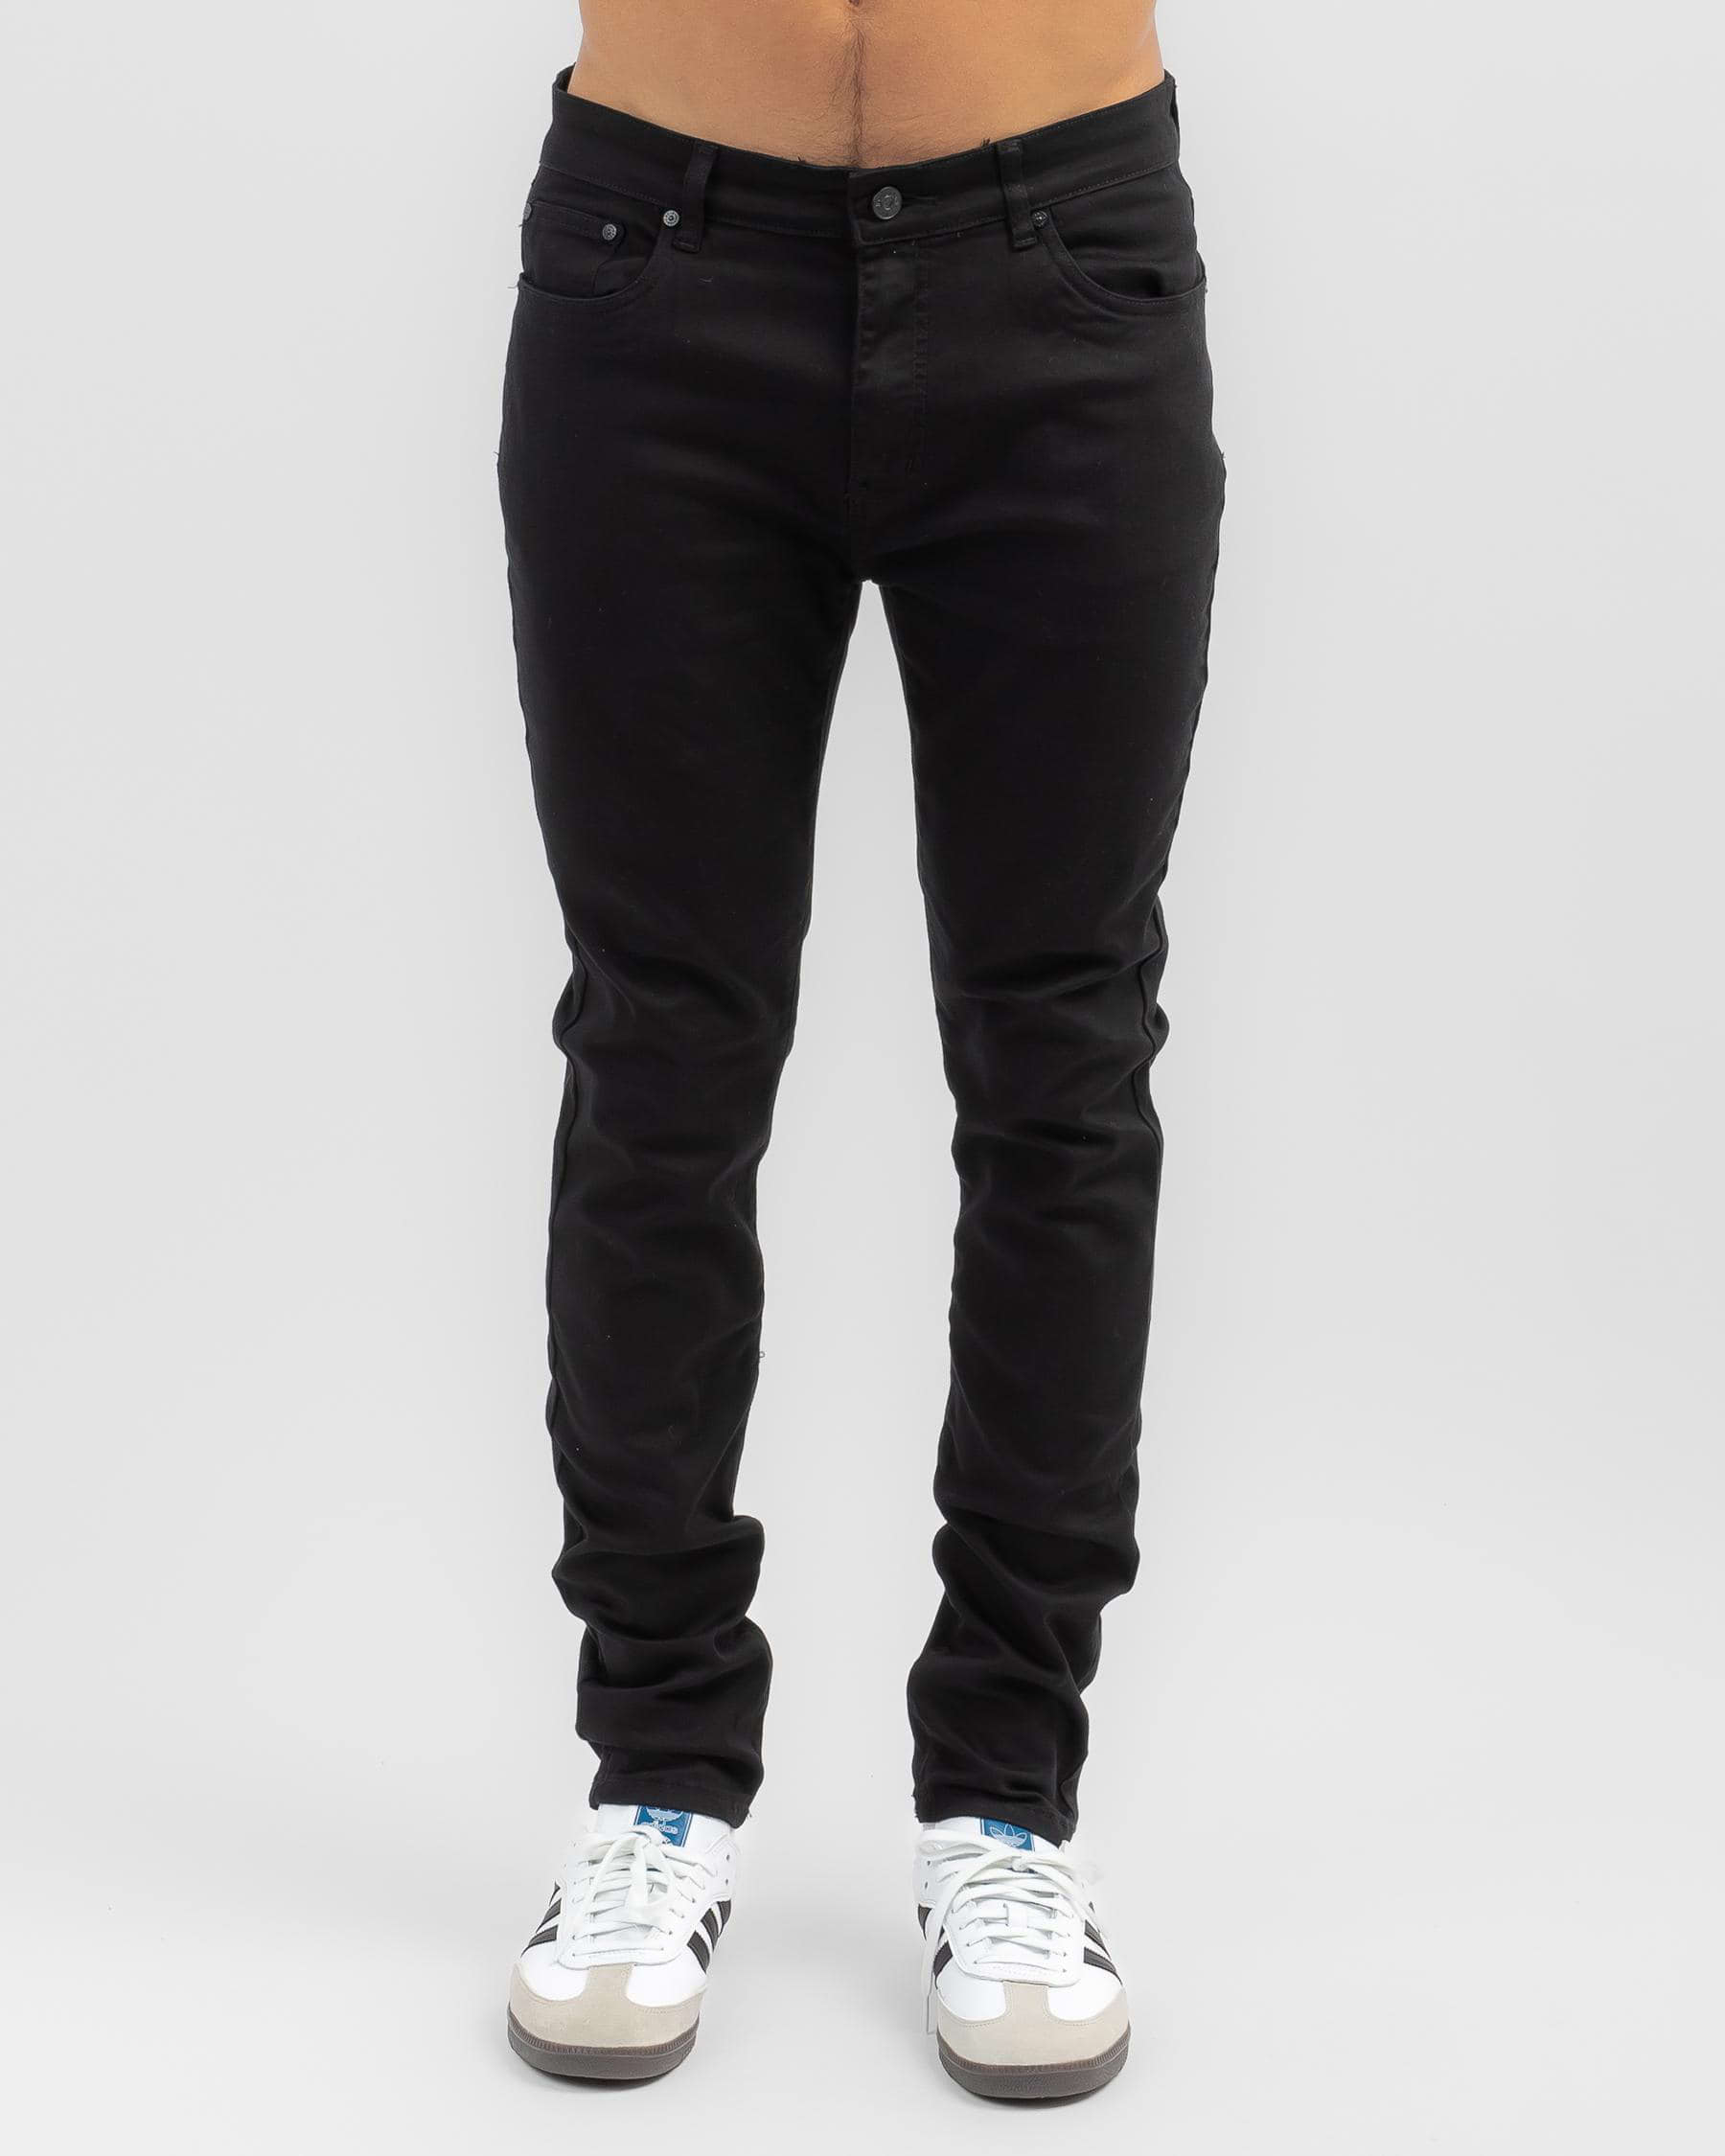 Shop Lucid Jet Jeans In Black - Fast Shipping & Easy Returns - City ...